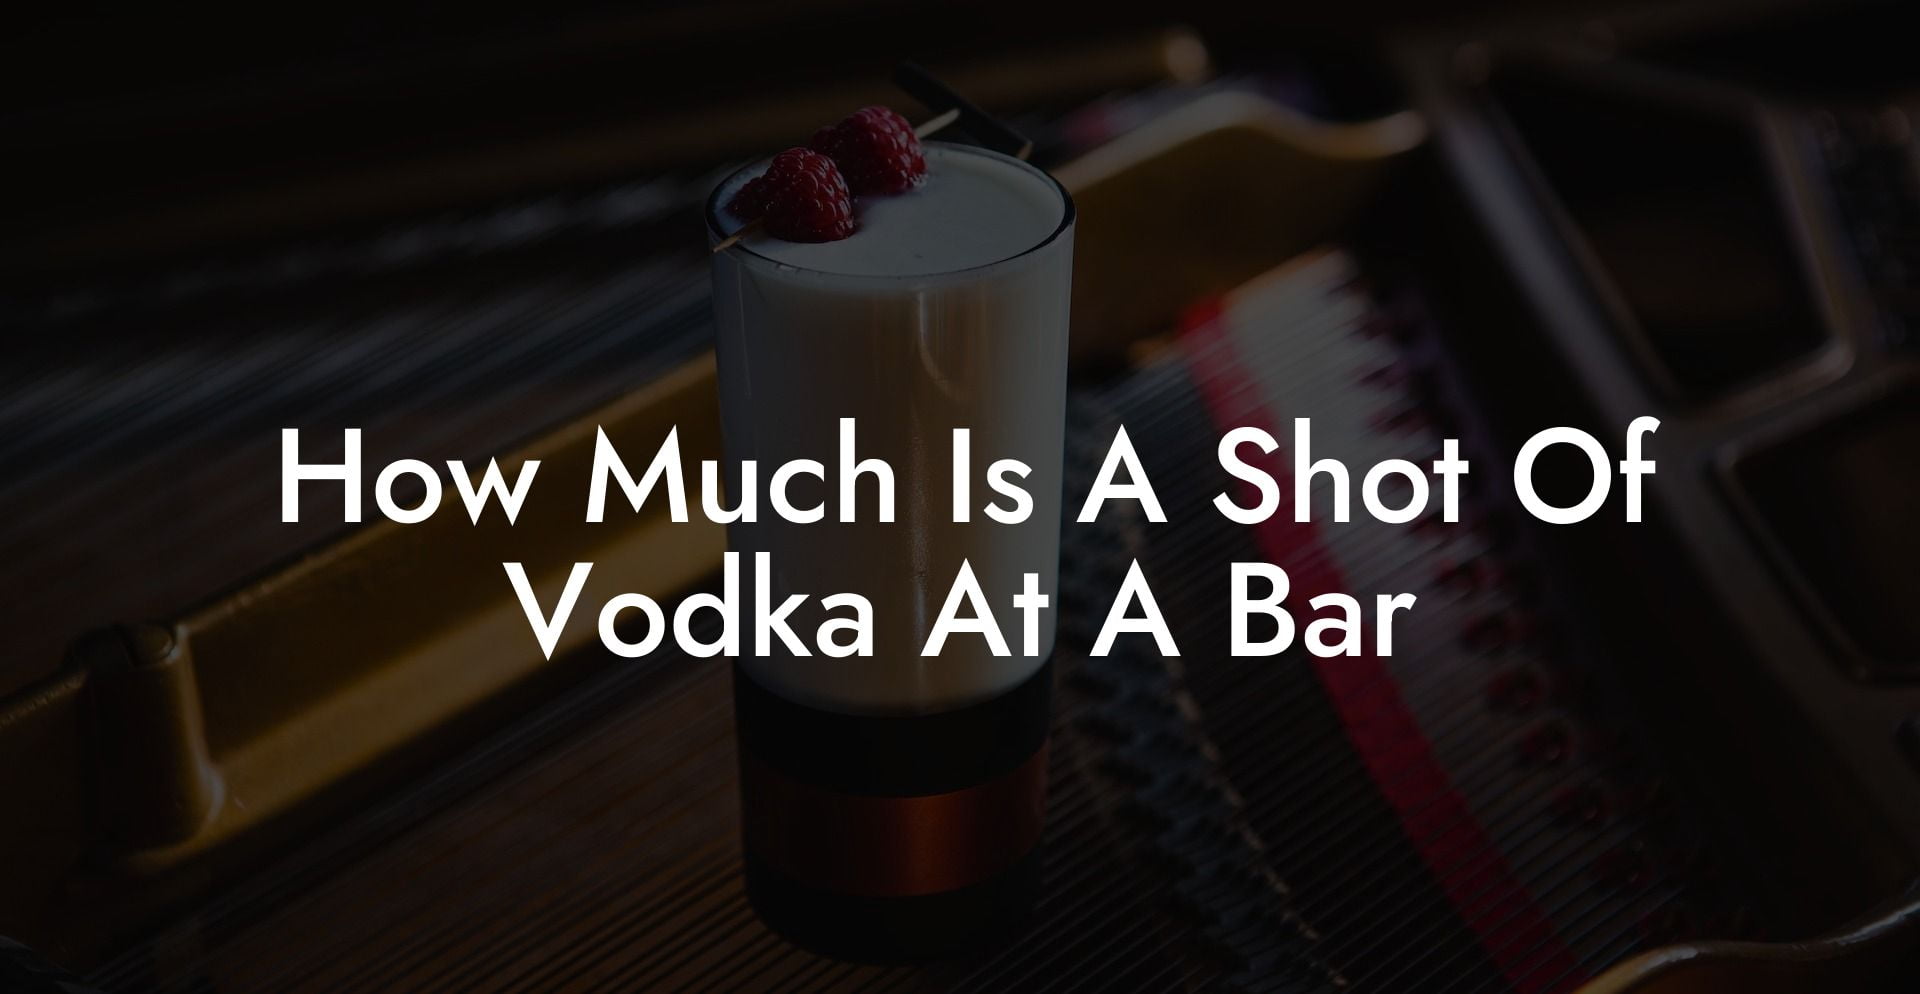 How Much Is A Shot Of Vodka At A Bar